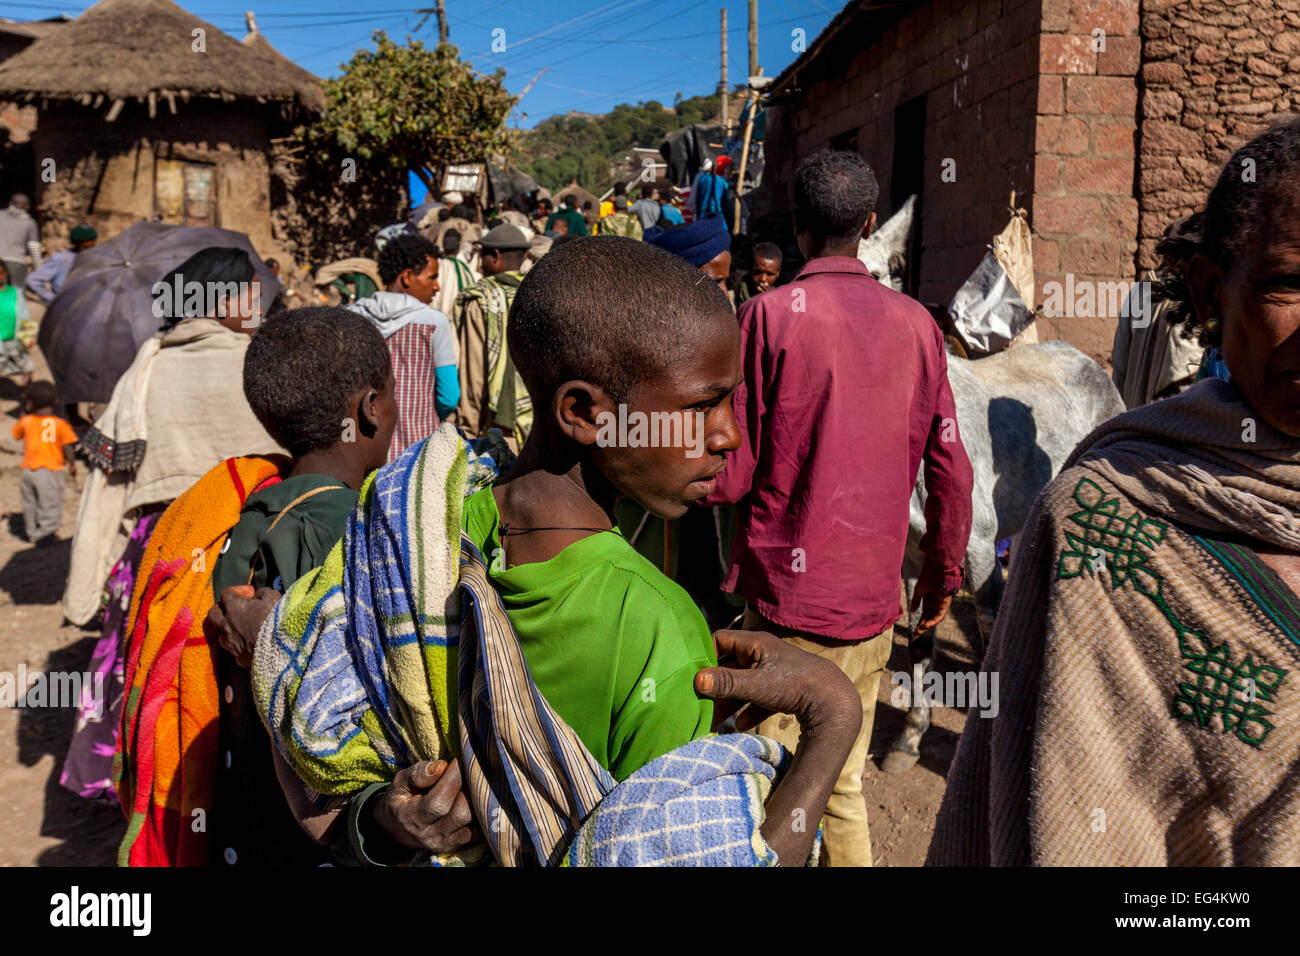 People On Their Way To The Saturday Market In Lalibela, Ethiopia Stock Photo